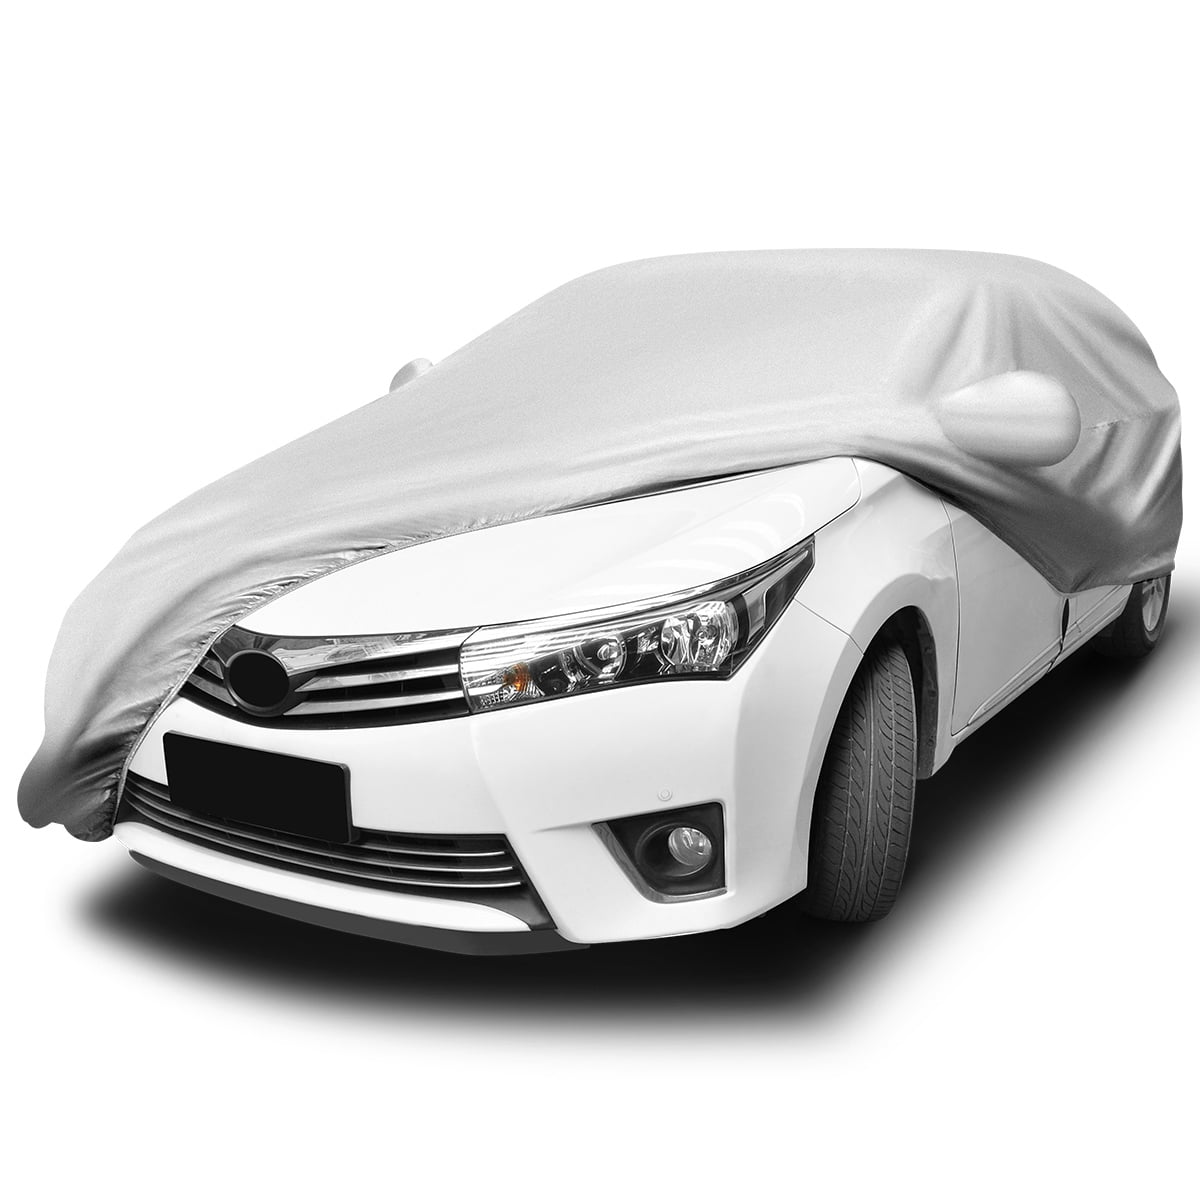 Car Cover Full Sedan Covers with Reflective Strip Sunscreen Protection W1L0